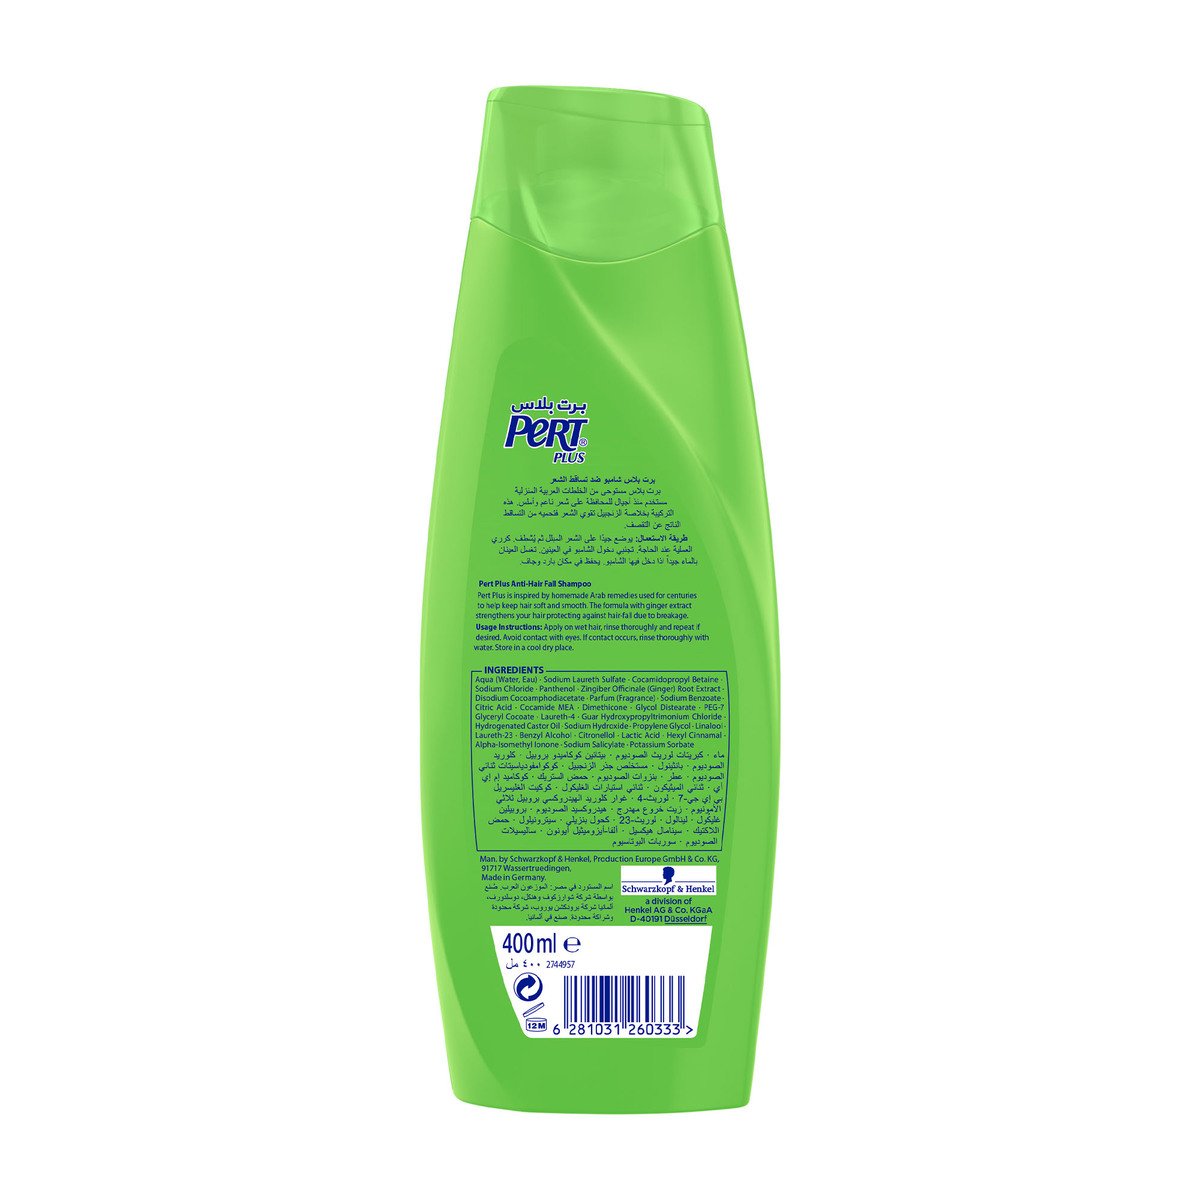 Pert Plus Shampoo with Ginger Extract 400 ml